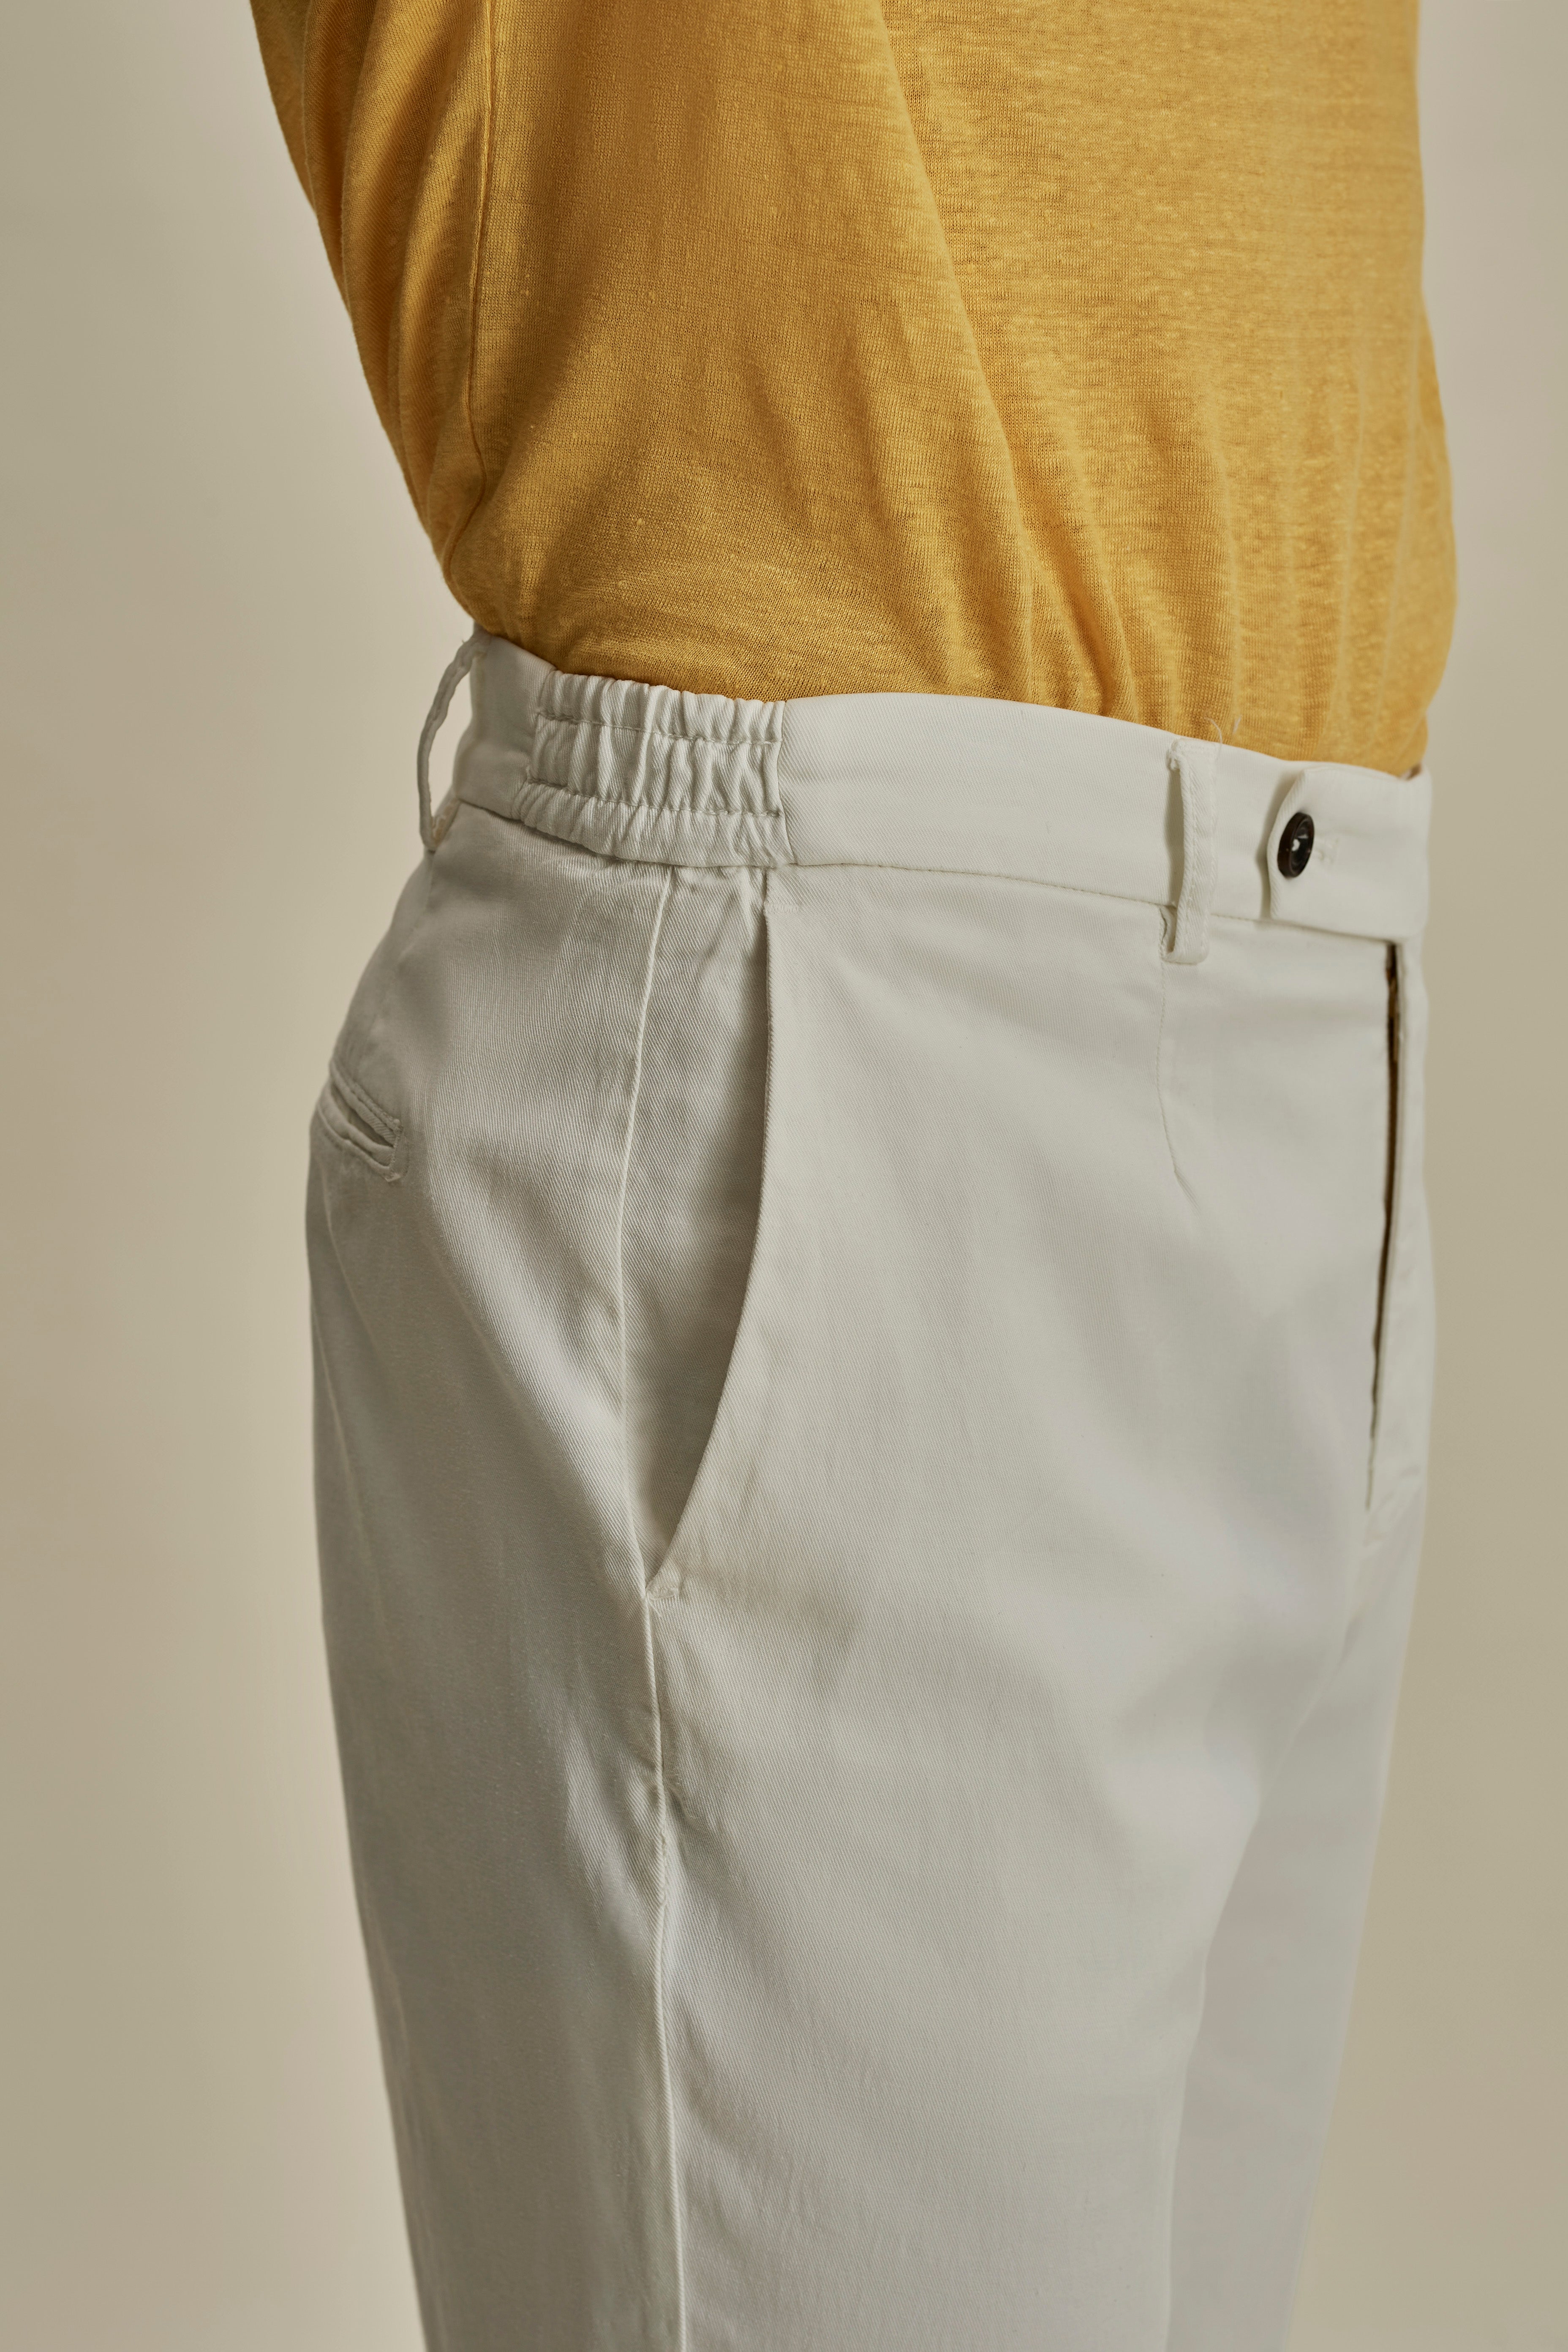 Cotton Easy Fit Flat Front Chinos White Detail Model Image